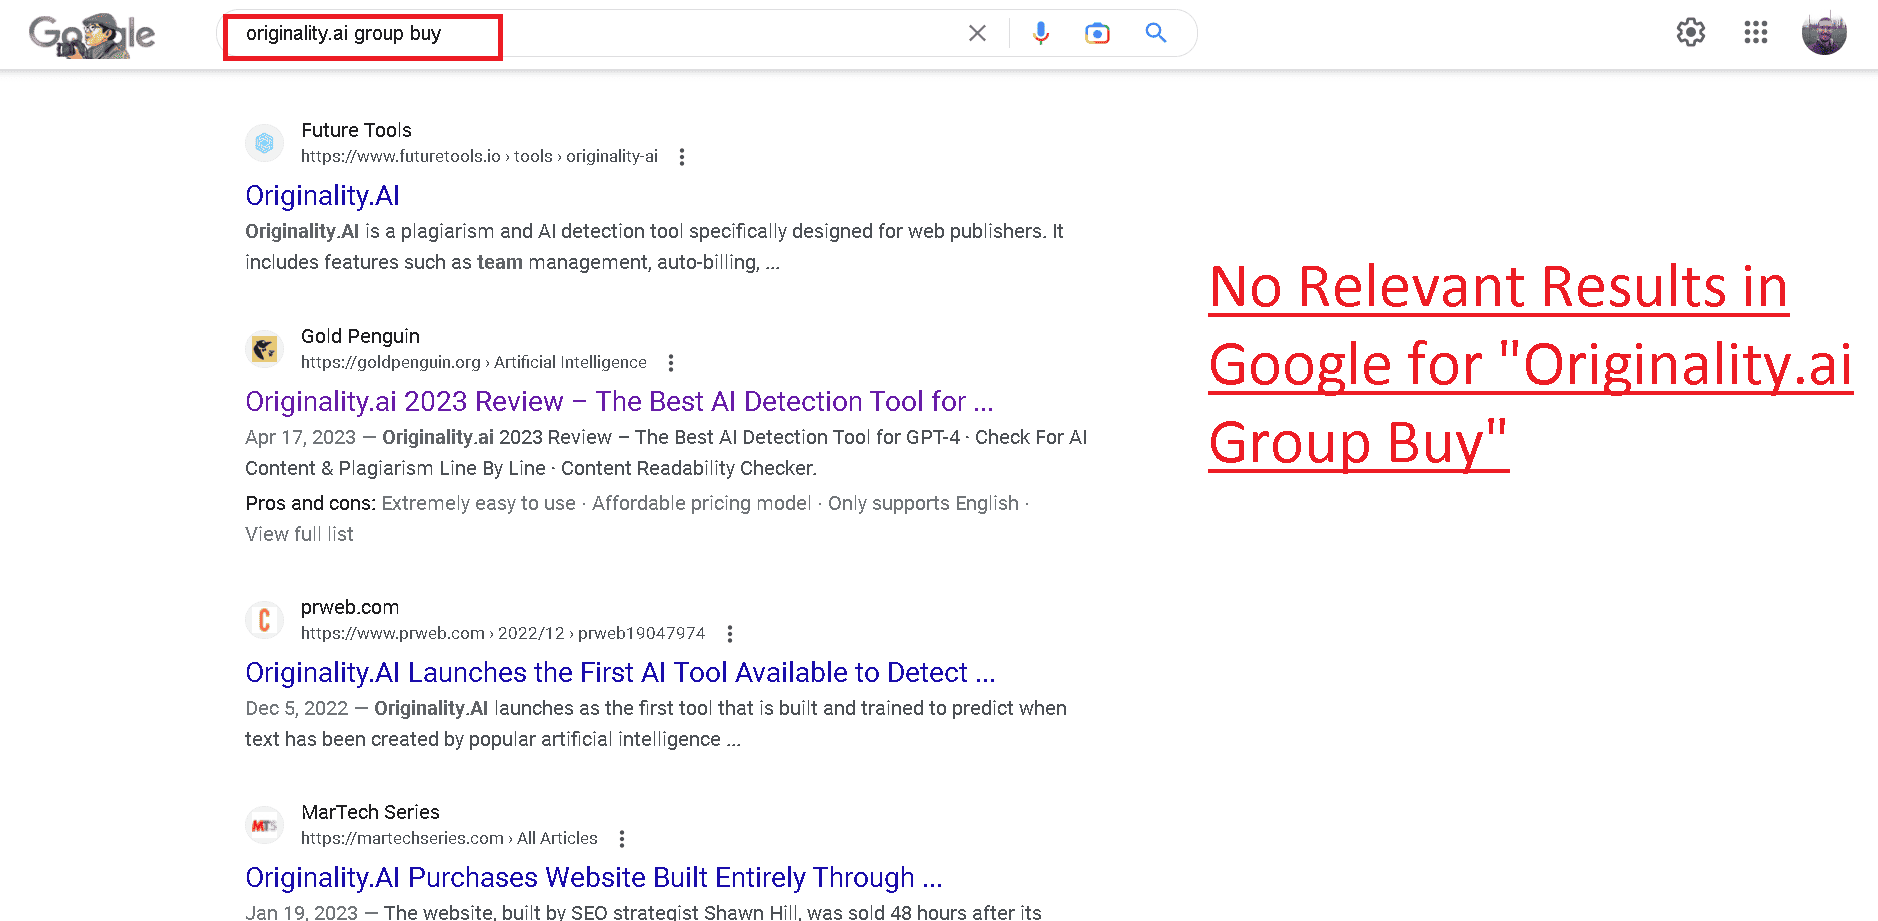 Originality.ai group buy query in Google shows no results